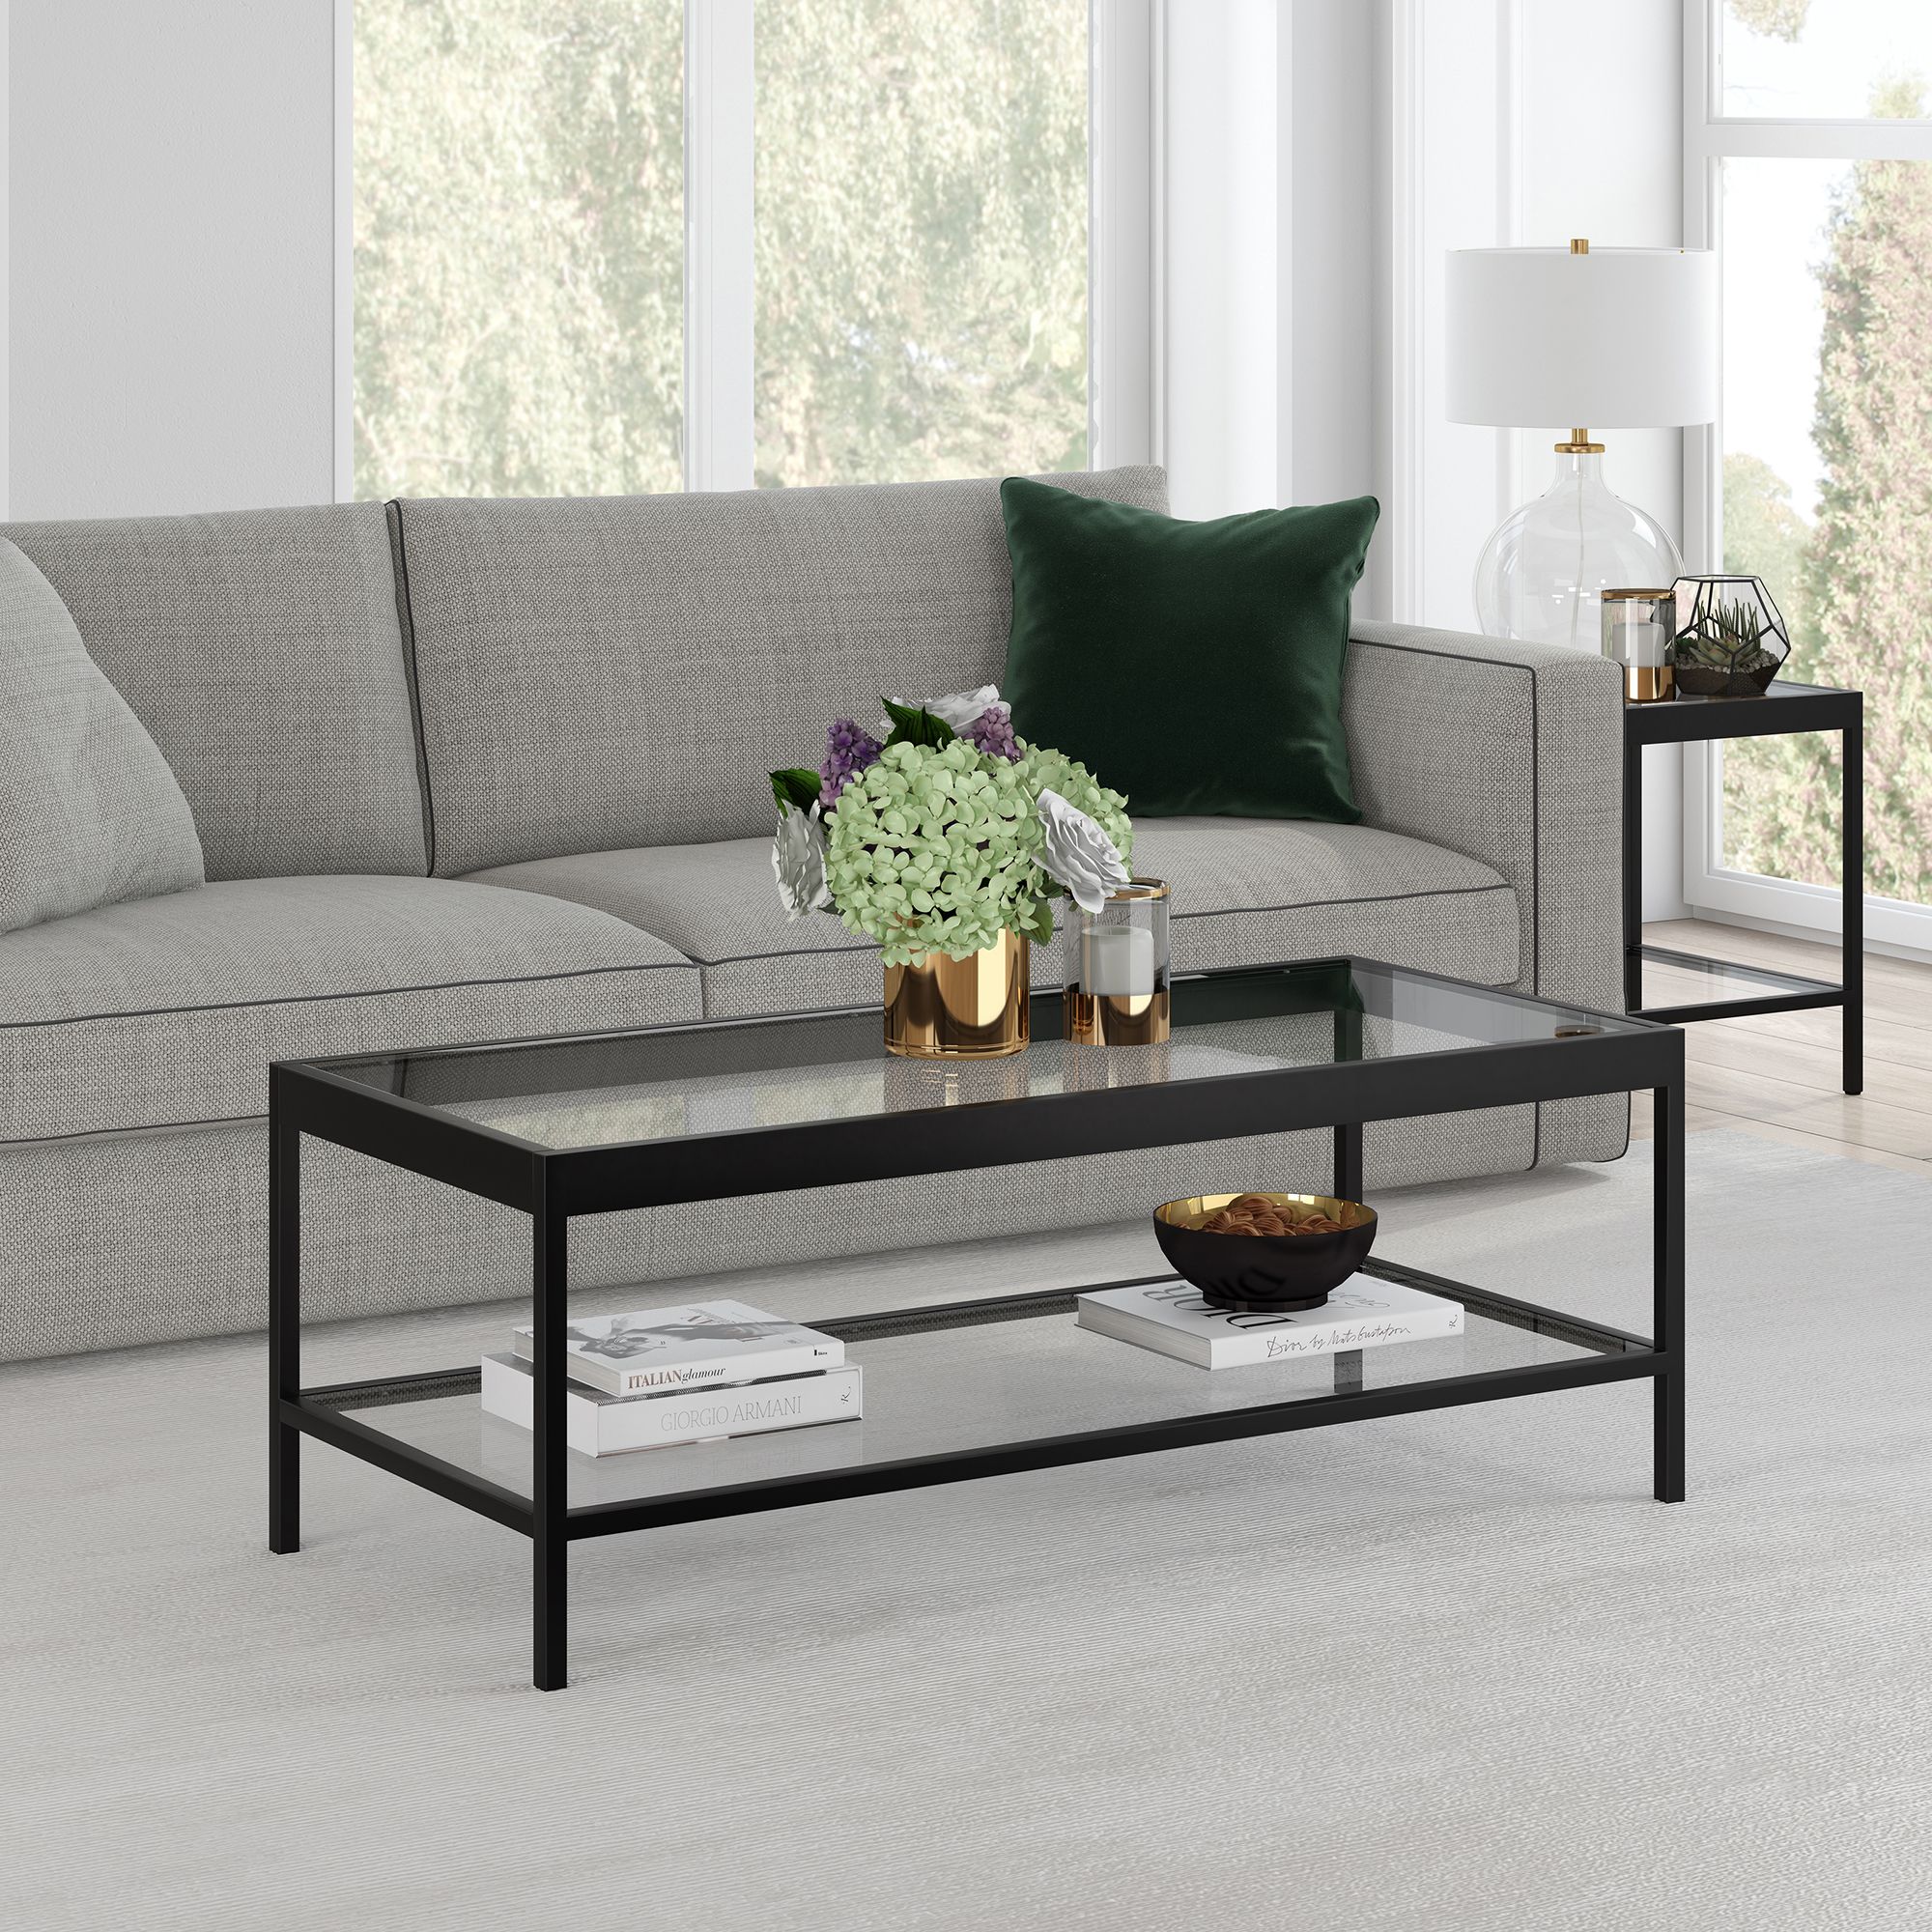 Modern Coffee Table With Open Shelf, Rectangular Table For Living Room For Glass And Gold Rectangular Desks (View 2 of 15)